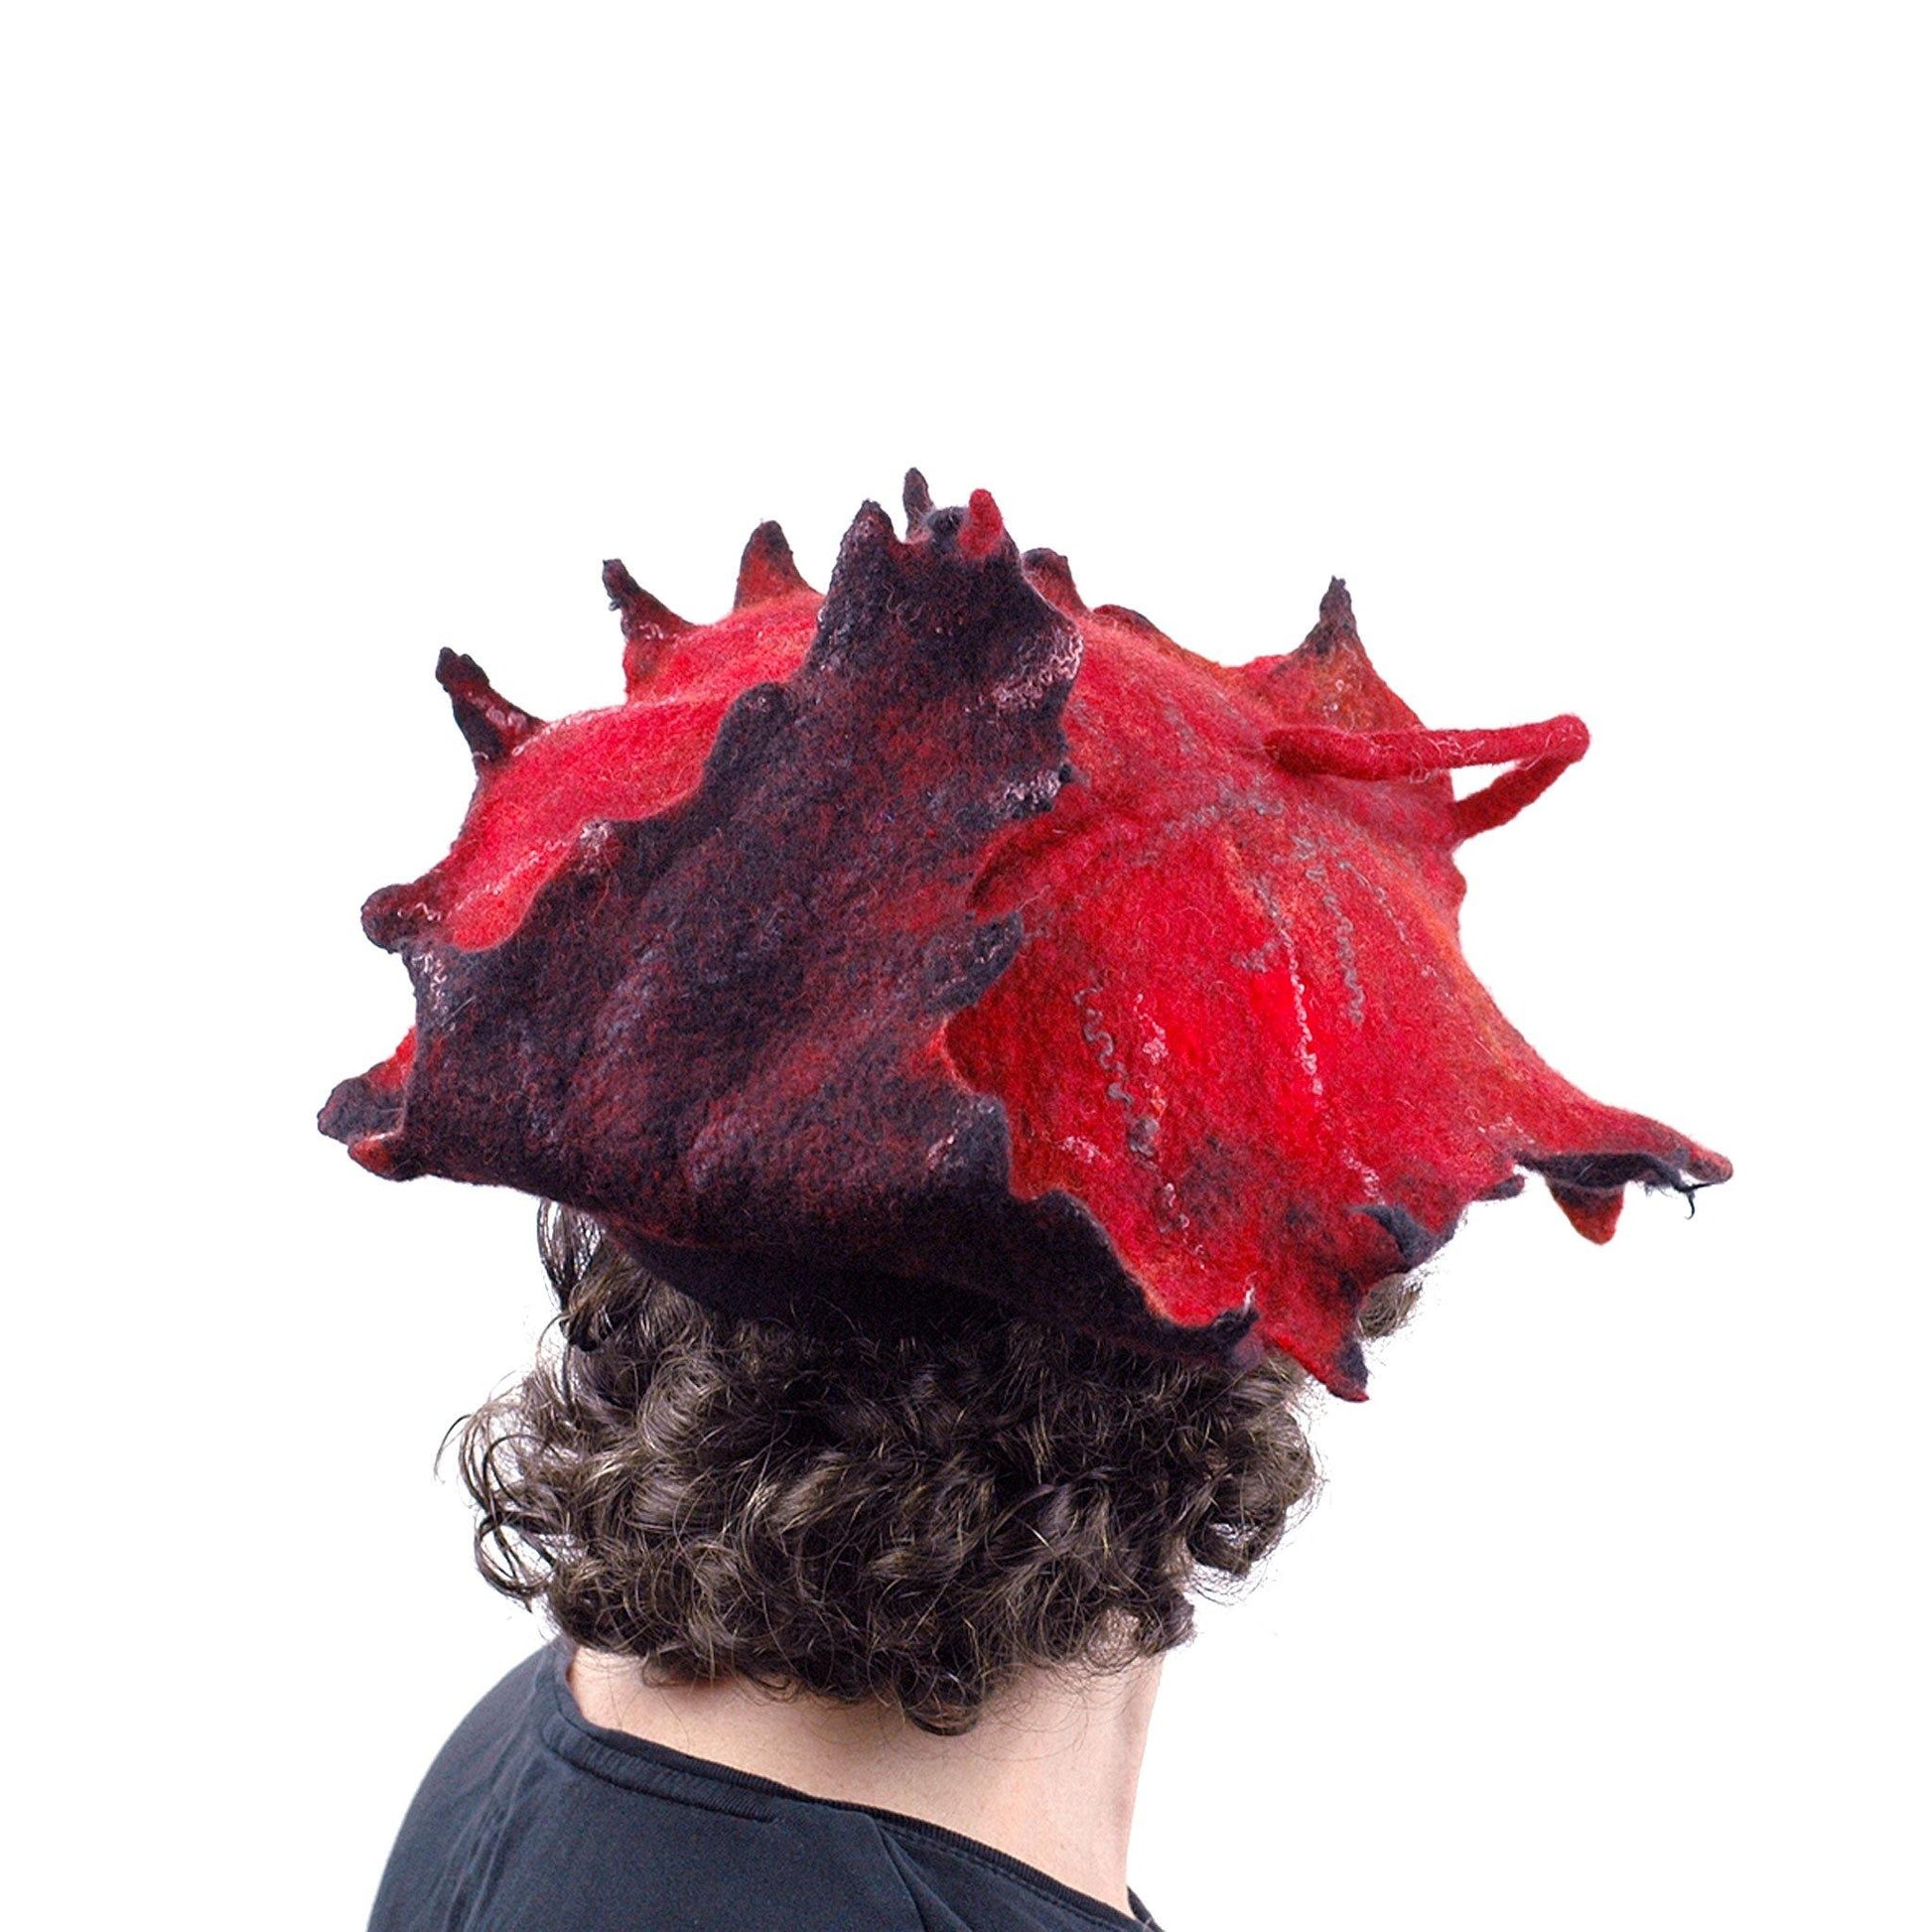 Autumn Inspired Leaf Hat in Red and Black - back view